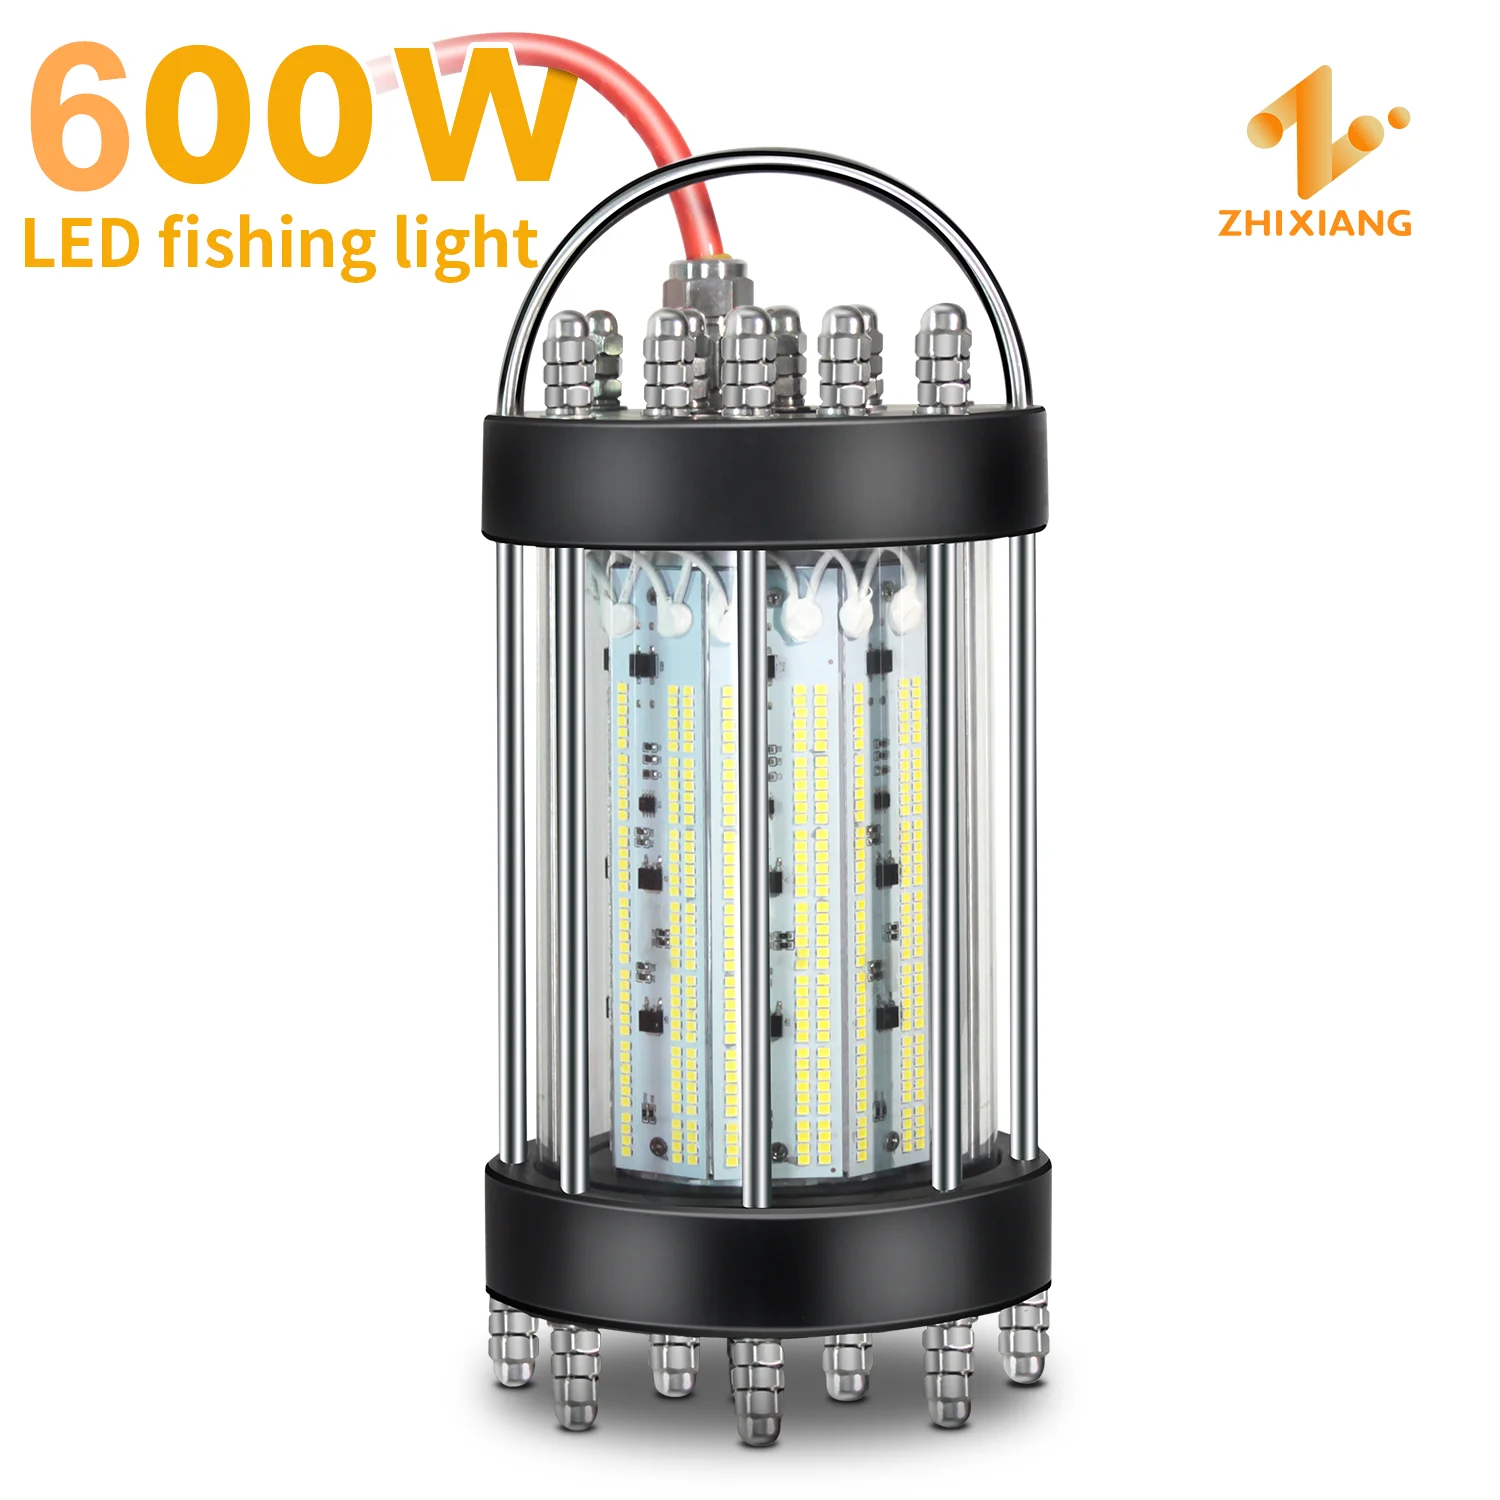 

600W 30M Cable Green LED Lure Bait Night Fishing Finder Crappie Shad Boat LED Submersible Underwater Light